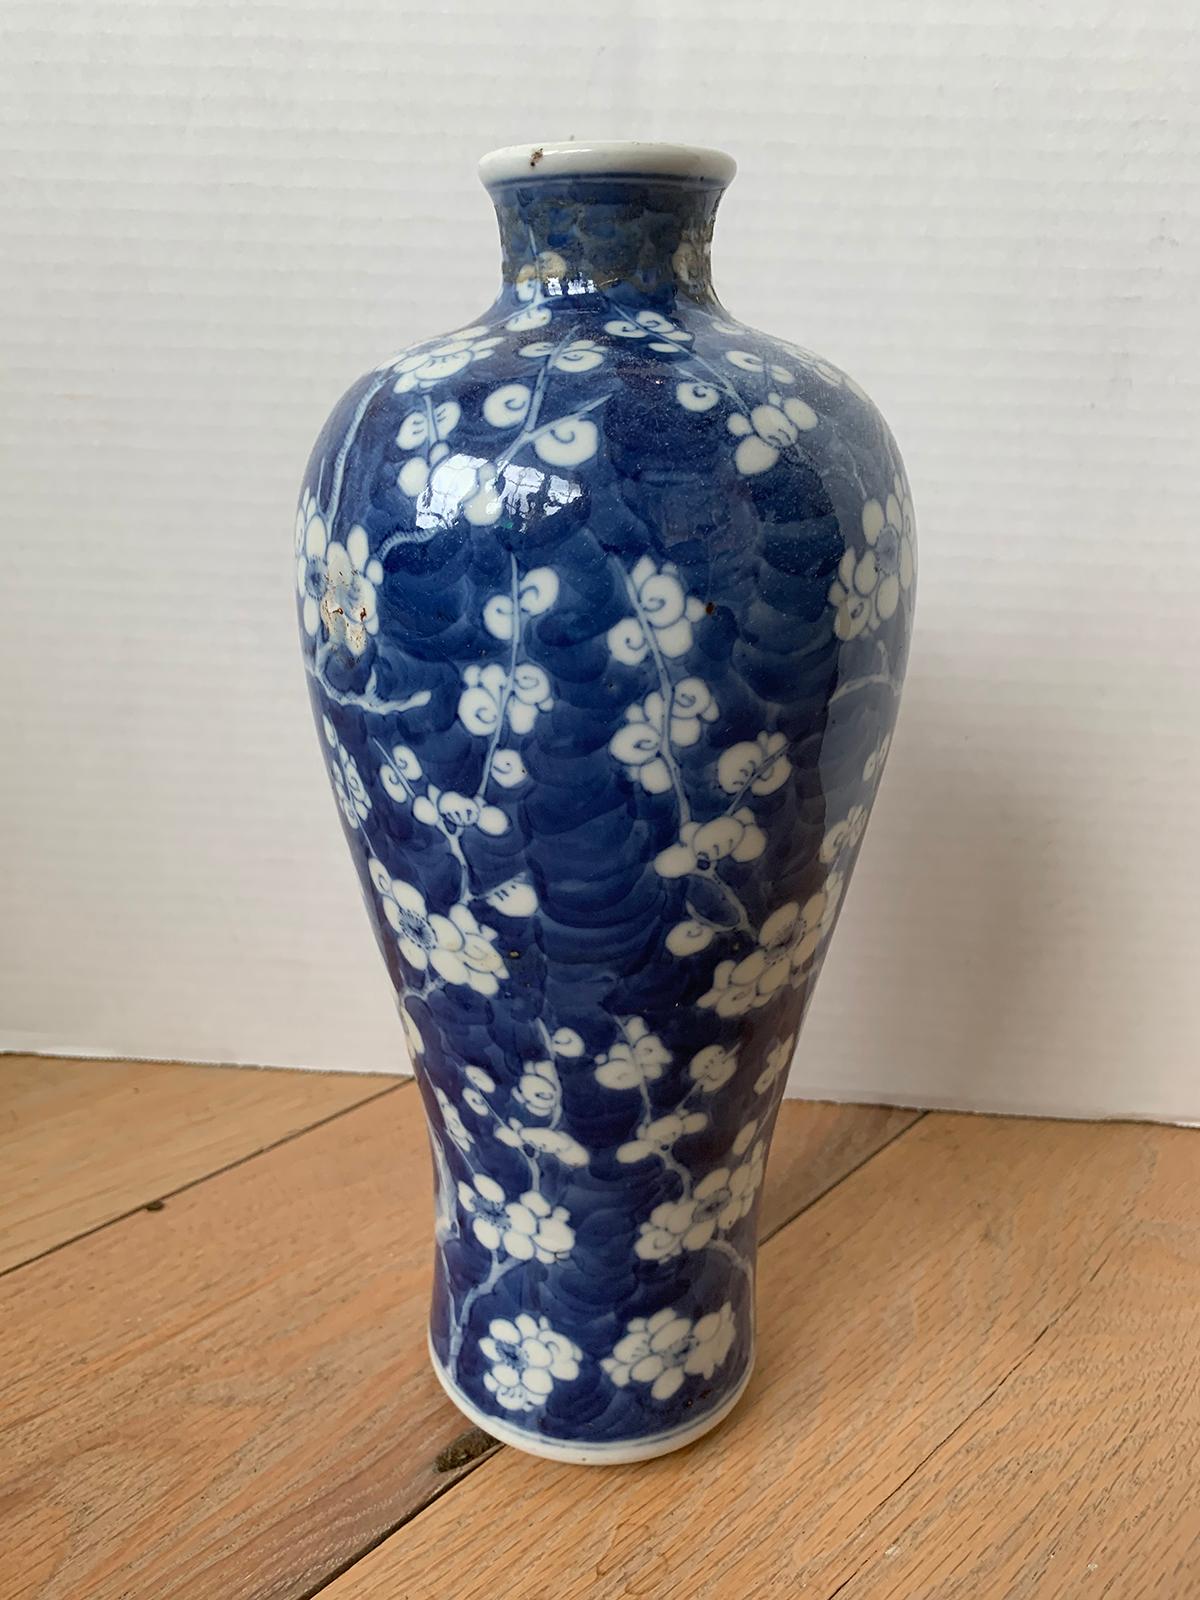 Early 20th century circa 1900-1910 Chinese Kangxi style blue and white cherry blossom porcelain vase, Meiping Form, marked.